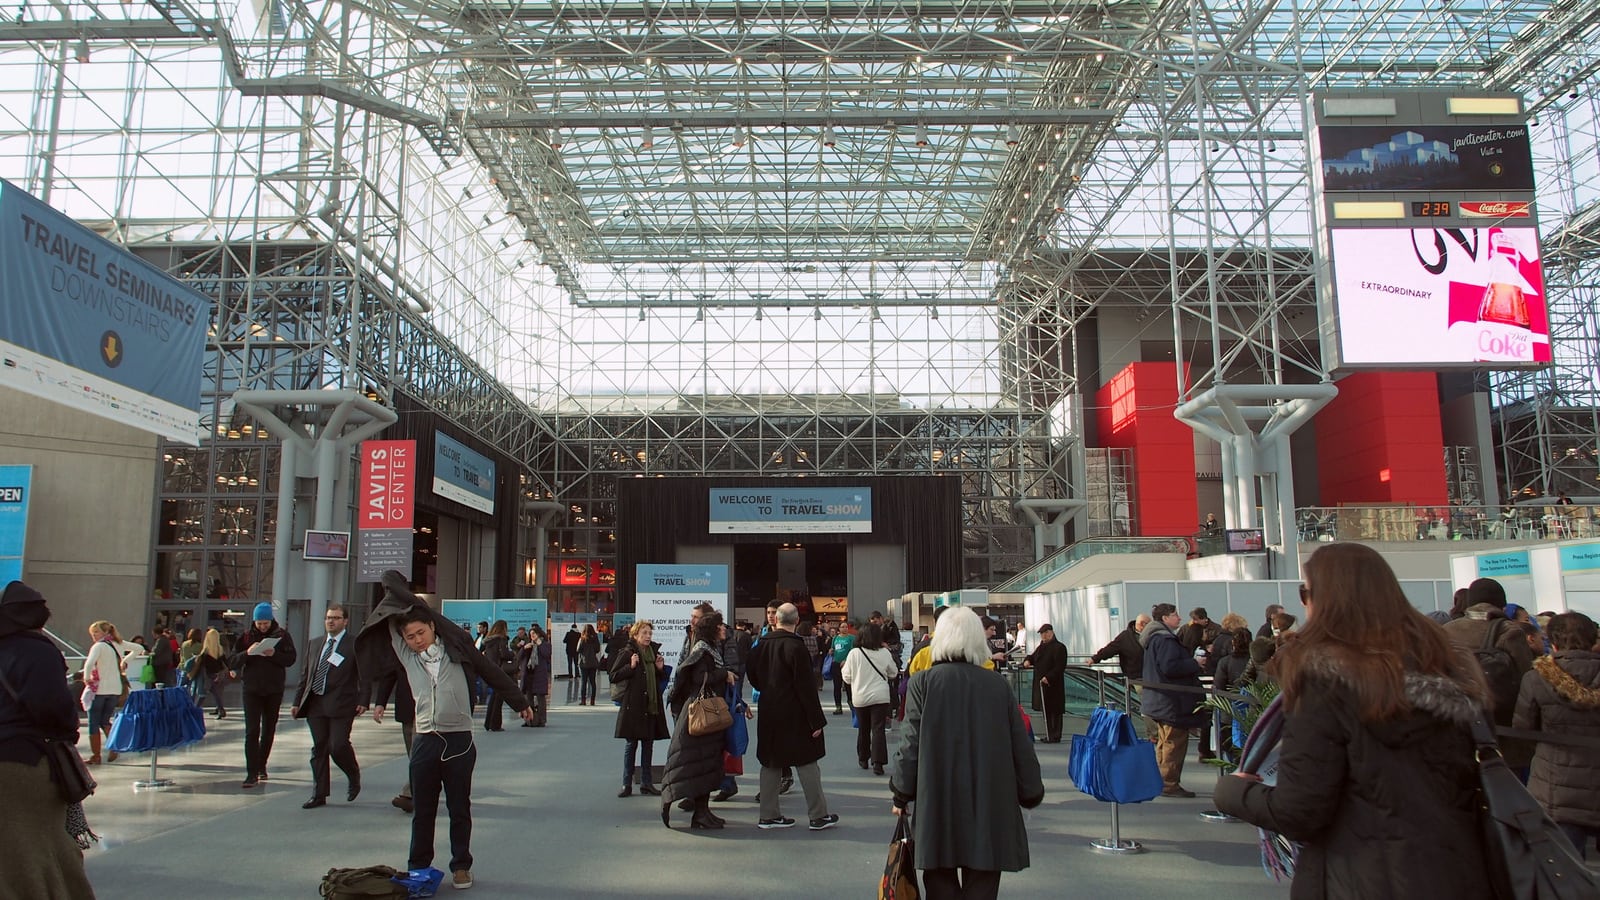 The New York TImes Travel Show 2014, at the Javits Center in New York City